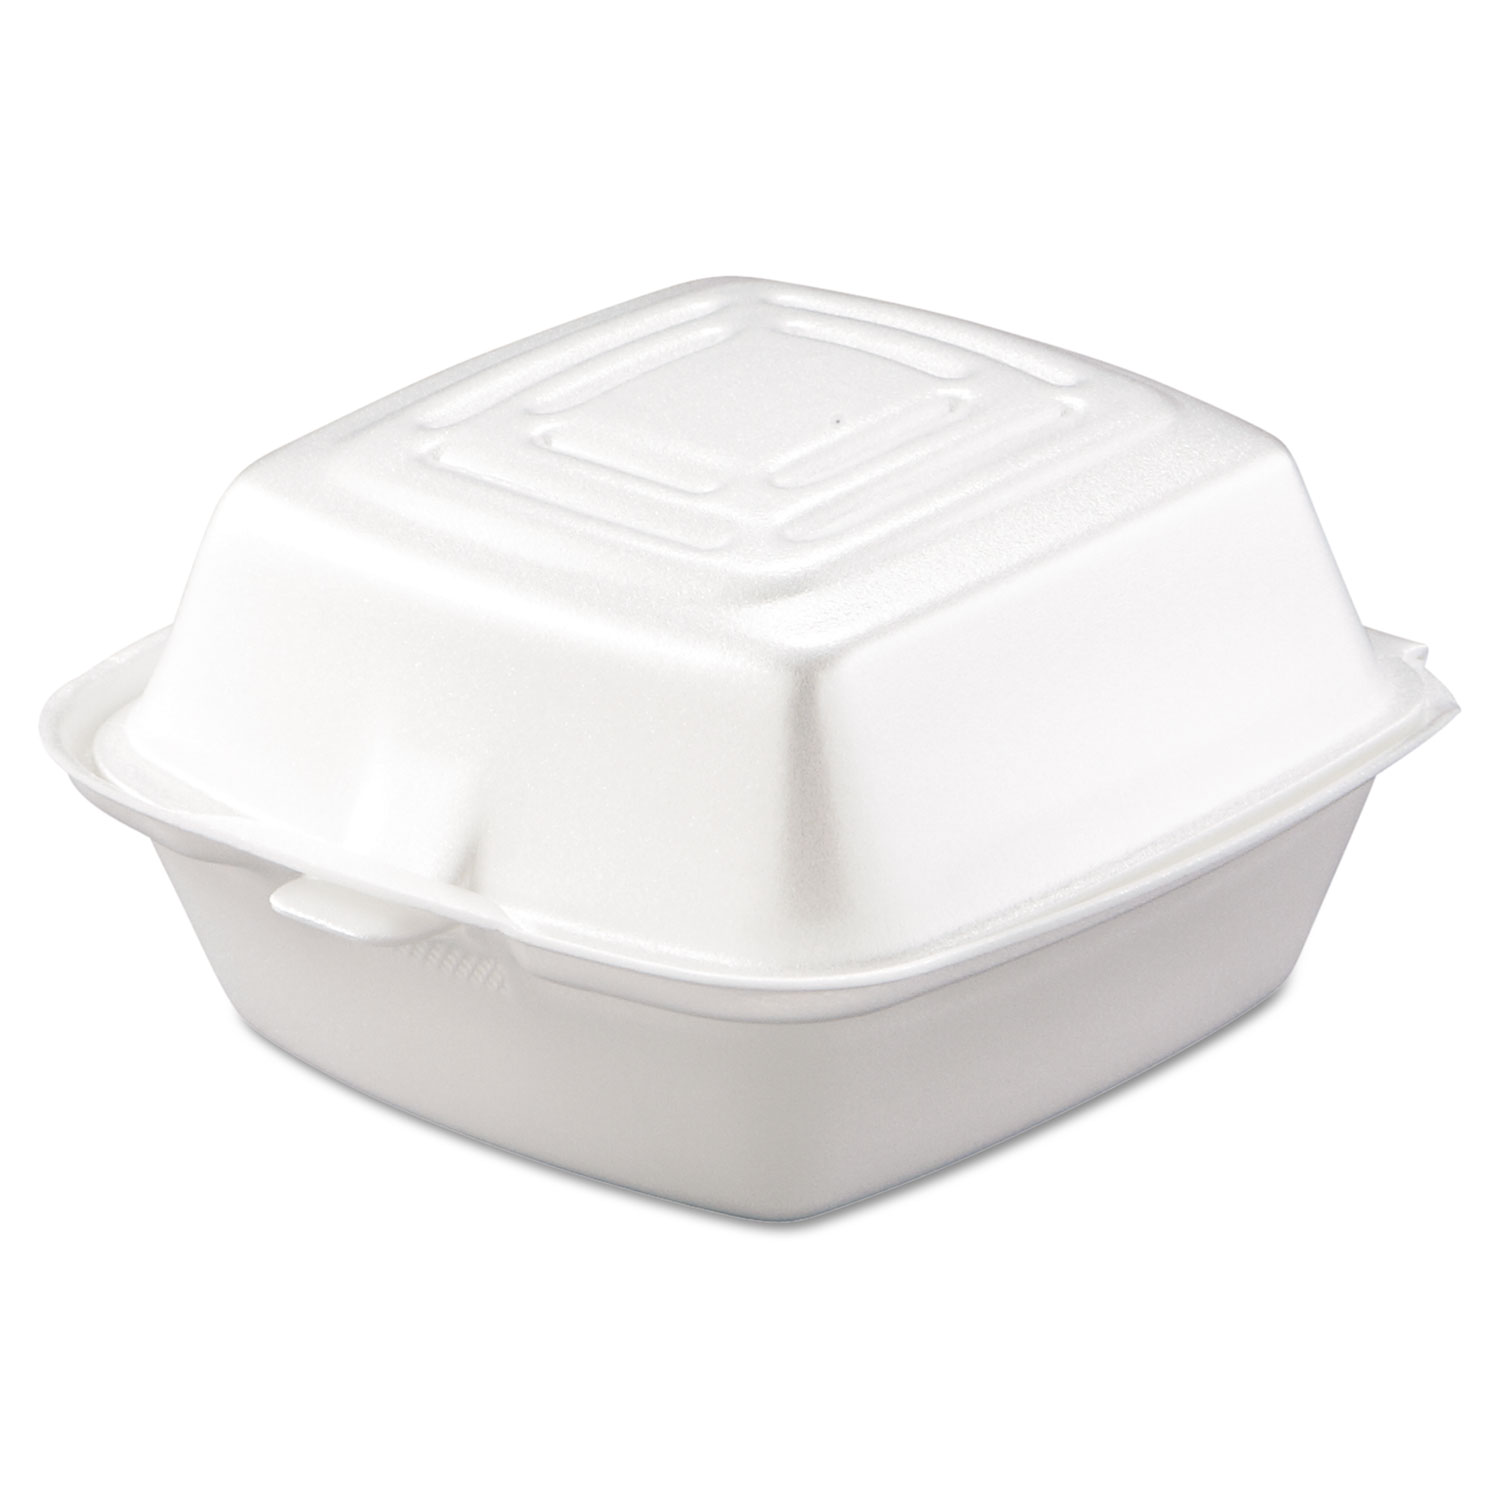  Dart 50HT1 Carryout Food Container, Foam, 1-Comp, 5 1/2 x 5 3/8 x 2 7/8, White, 500/Carton (DCC50HT1) 